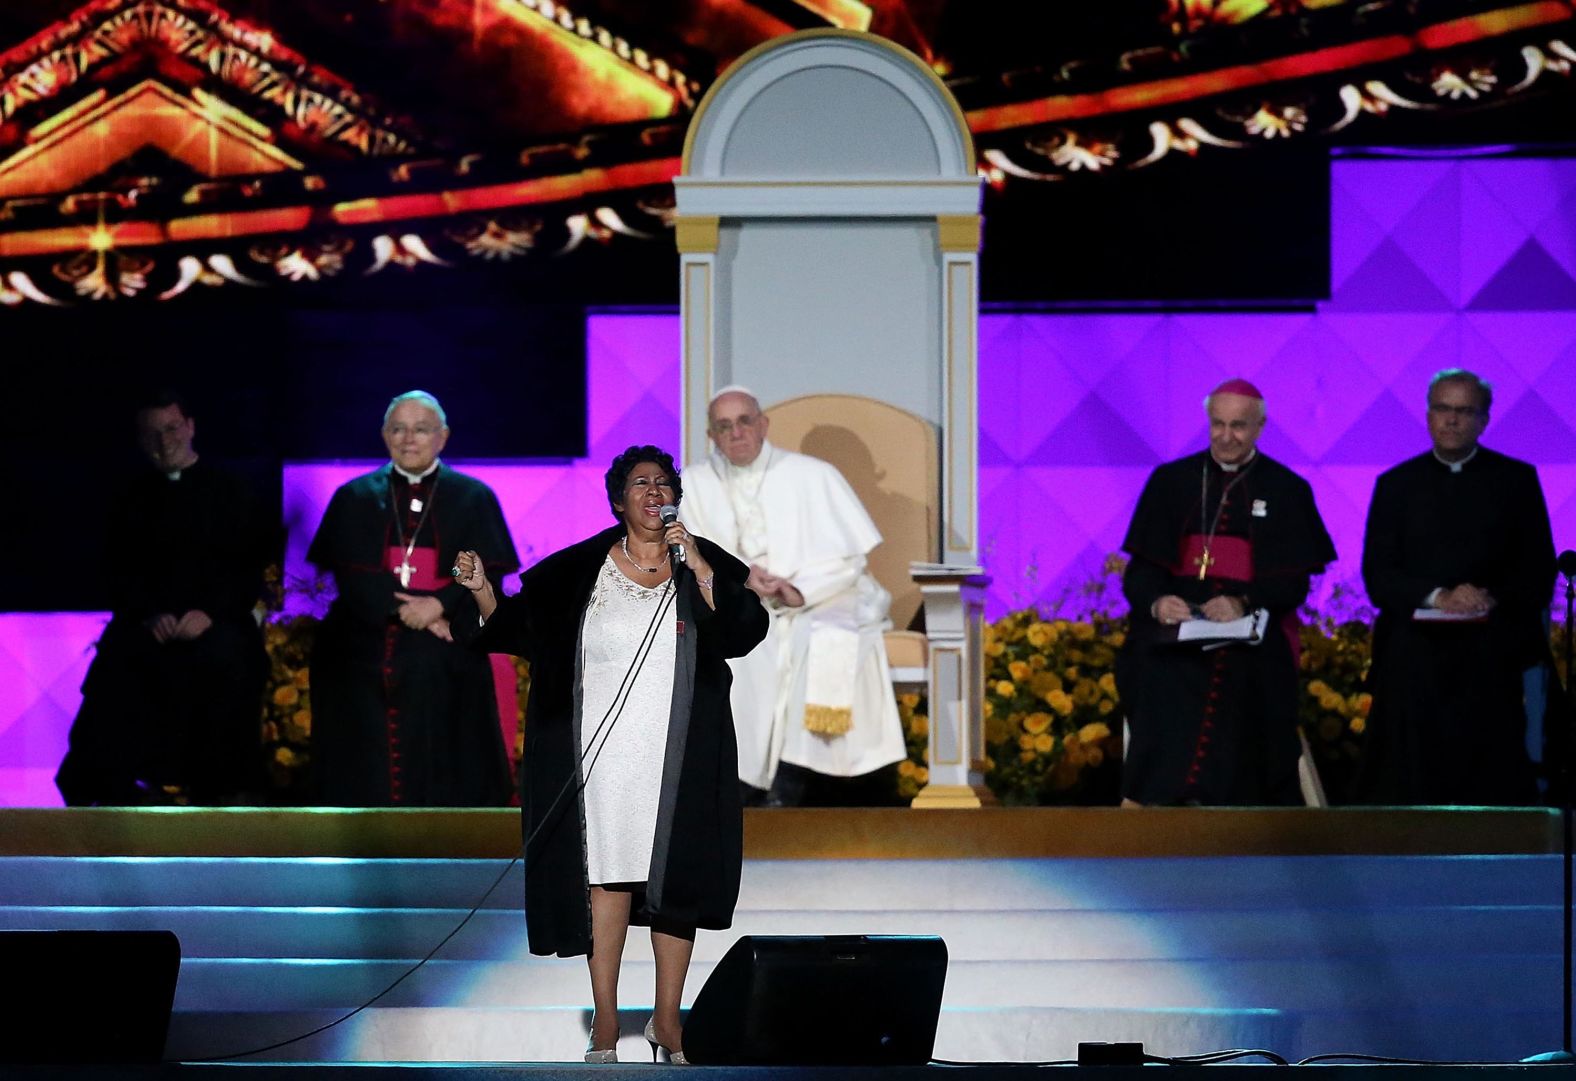 Pope Francis looks on as Franklin performs during the 2015 Festival of Families in Philadelphia, Pennsylvania.  